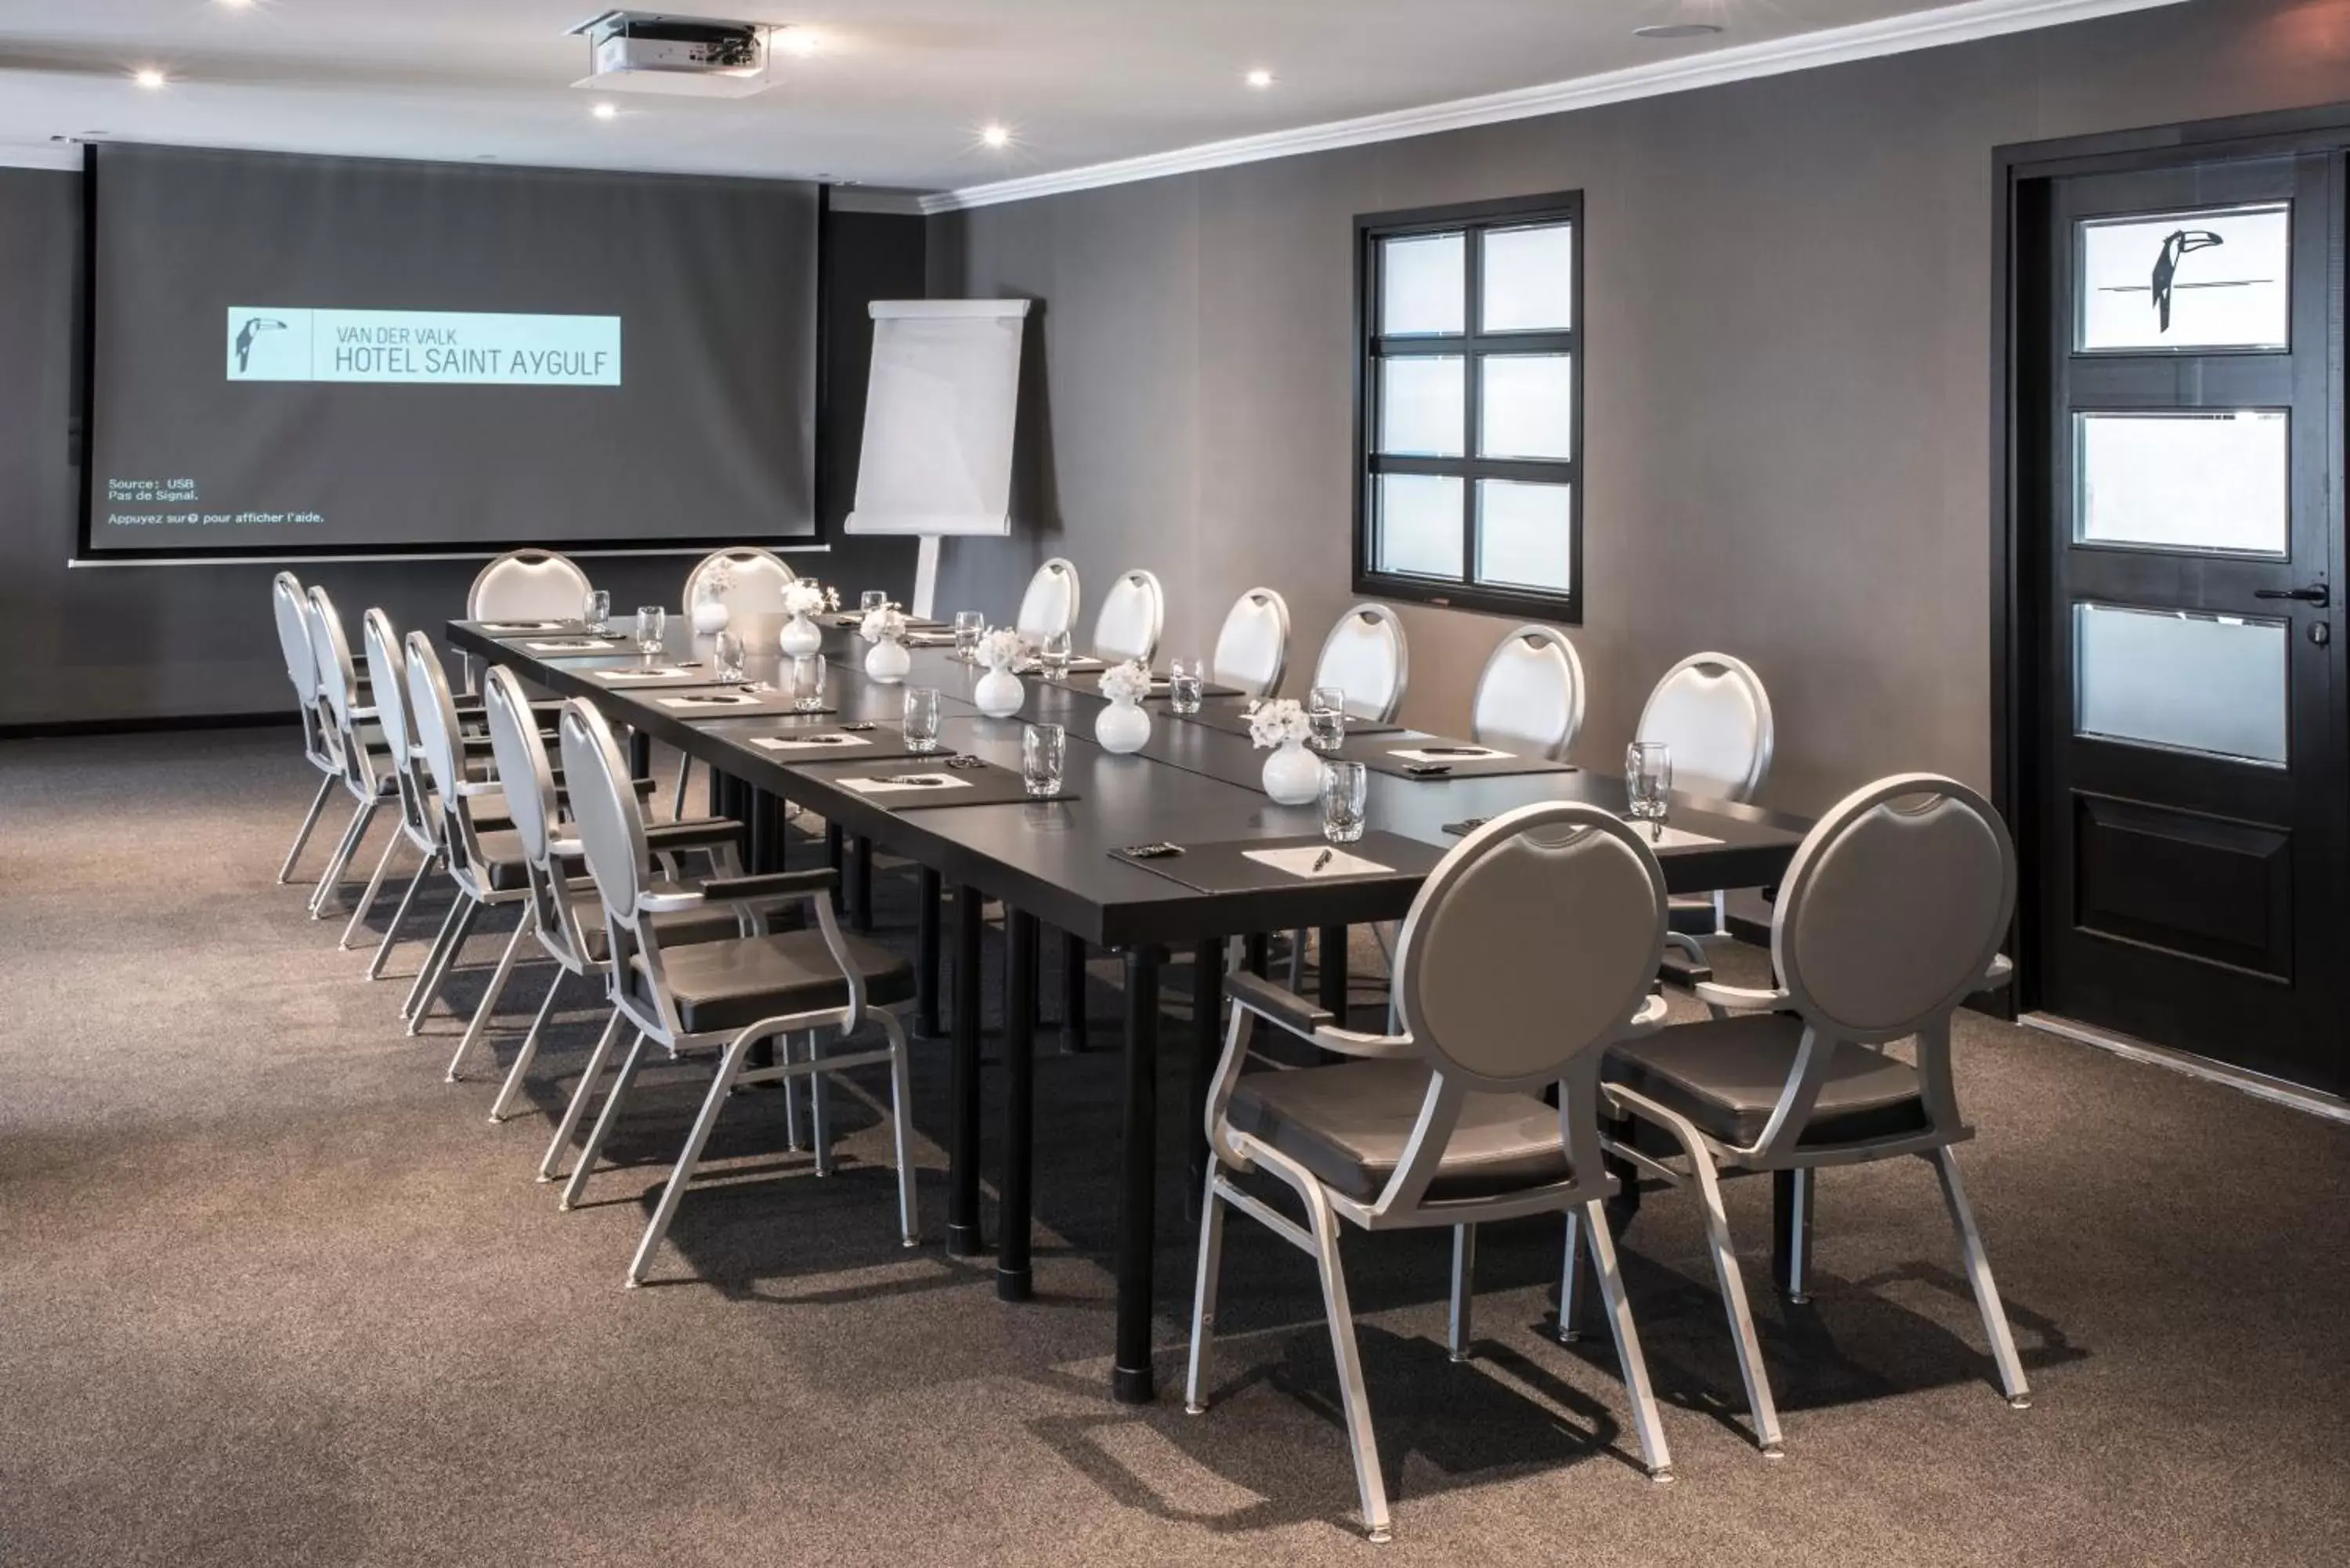 Banquet/Function facilities, Business Area/Conference Room in Van der Valk Hotel Saint-Aygulf